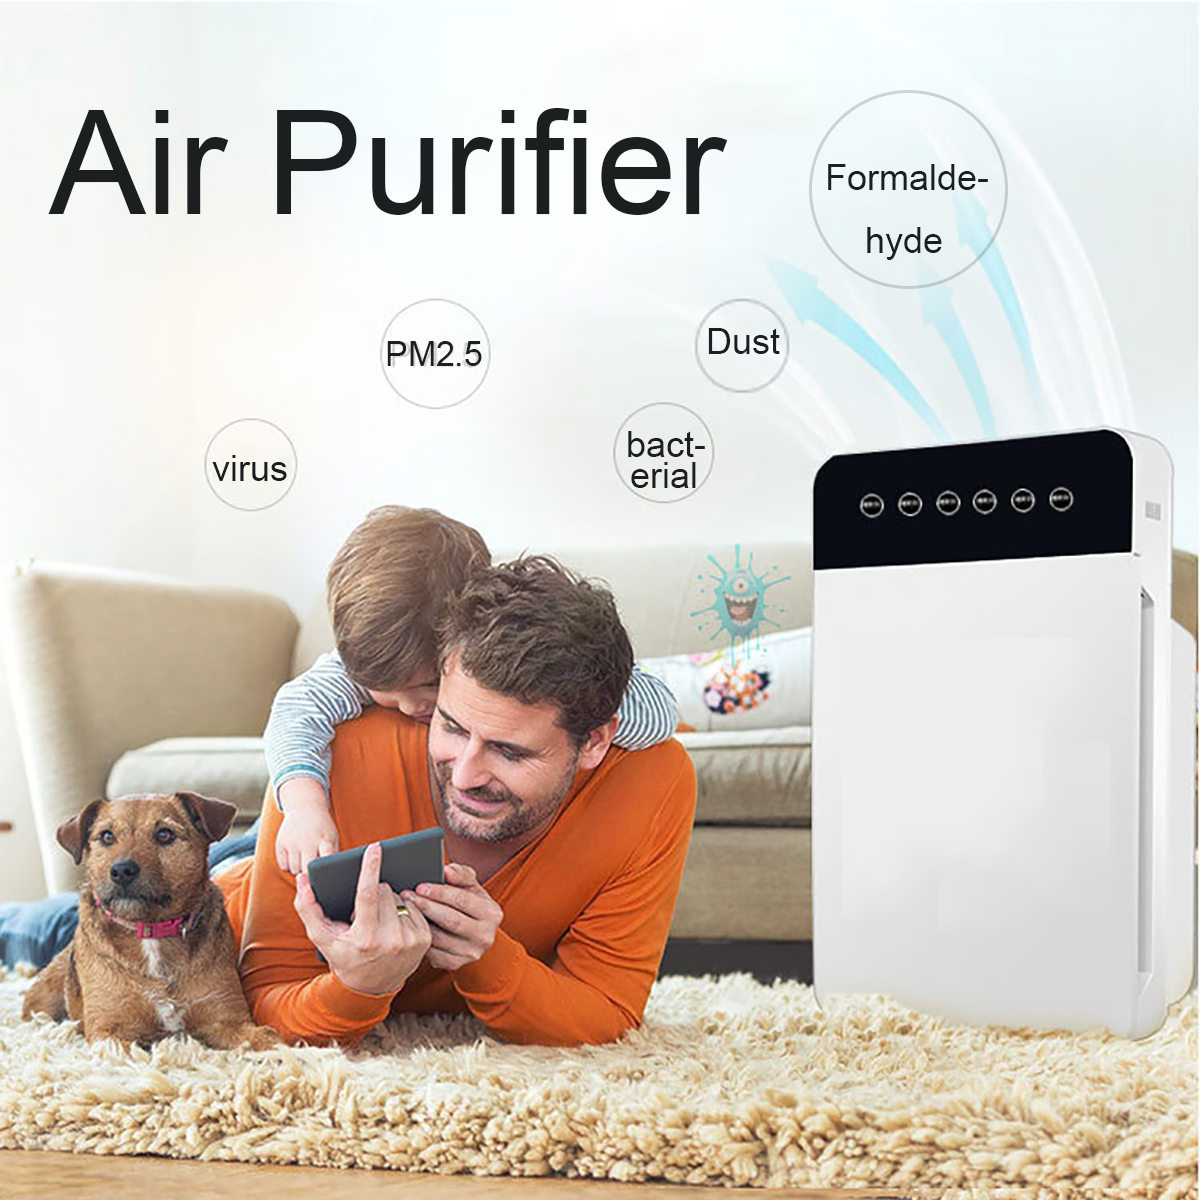 Air-Purifier-Negative-Ions-Air-Cleaner-Remove-Formaldehyde-PM25-W-HEPA-Filter-1628421-6